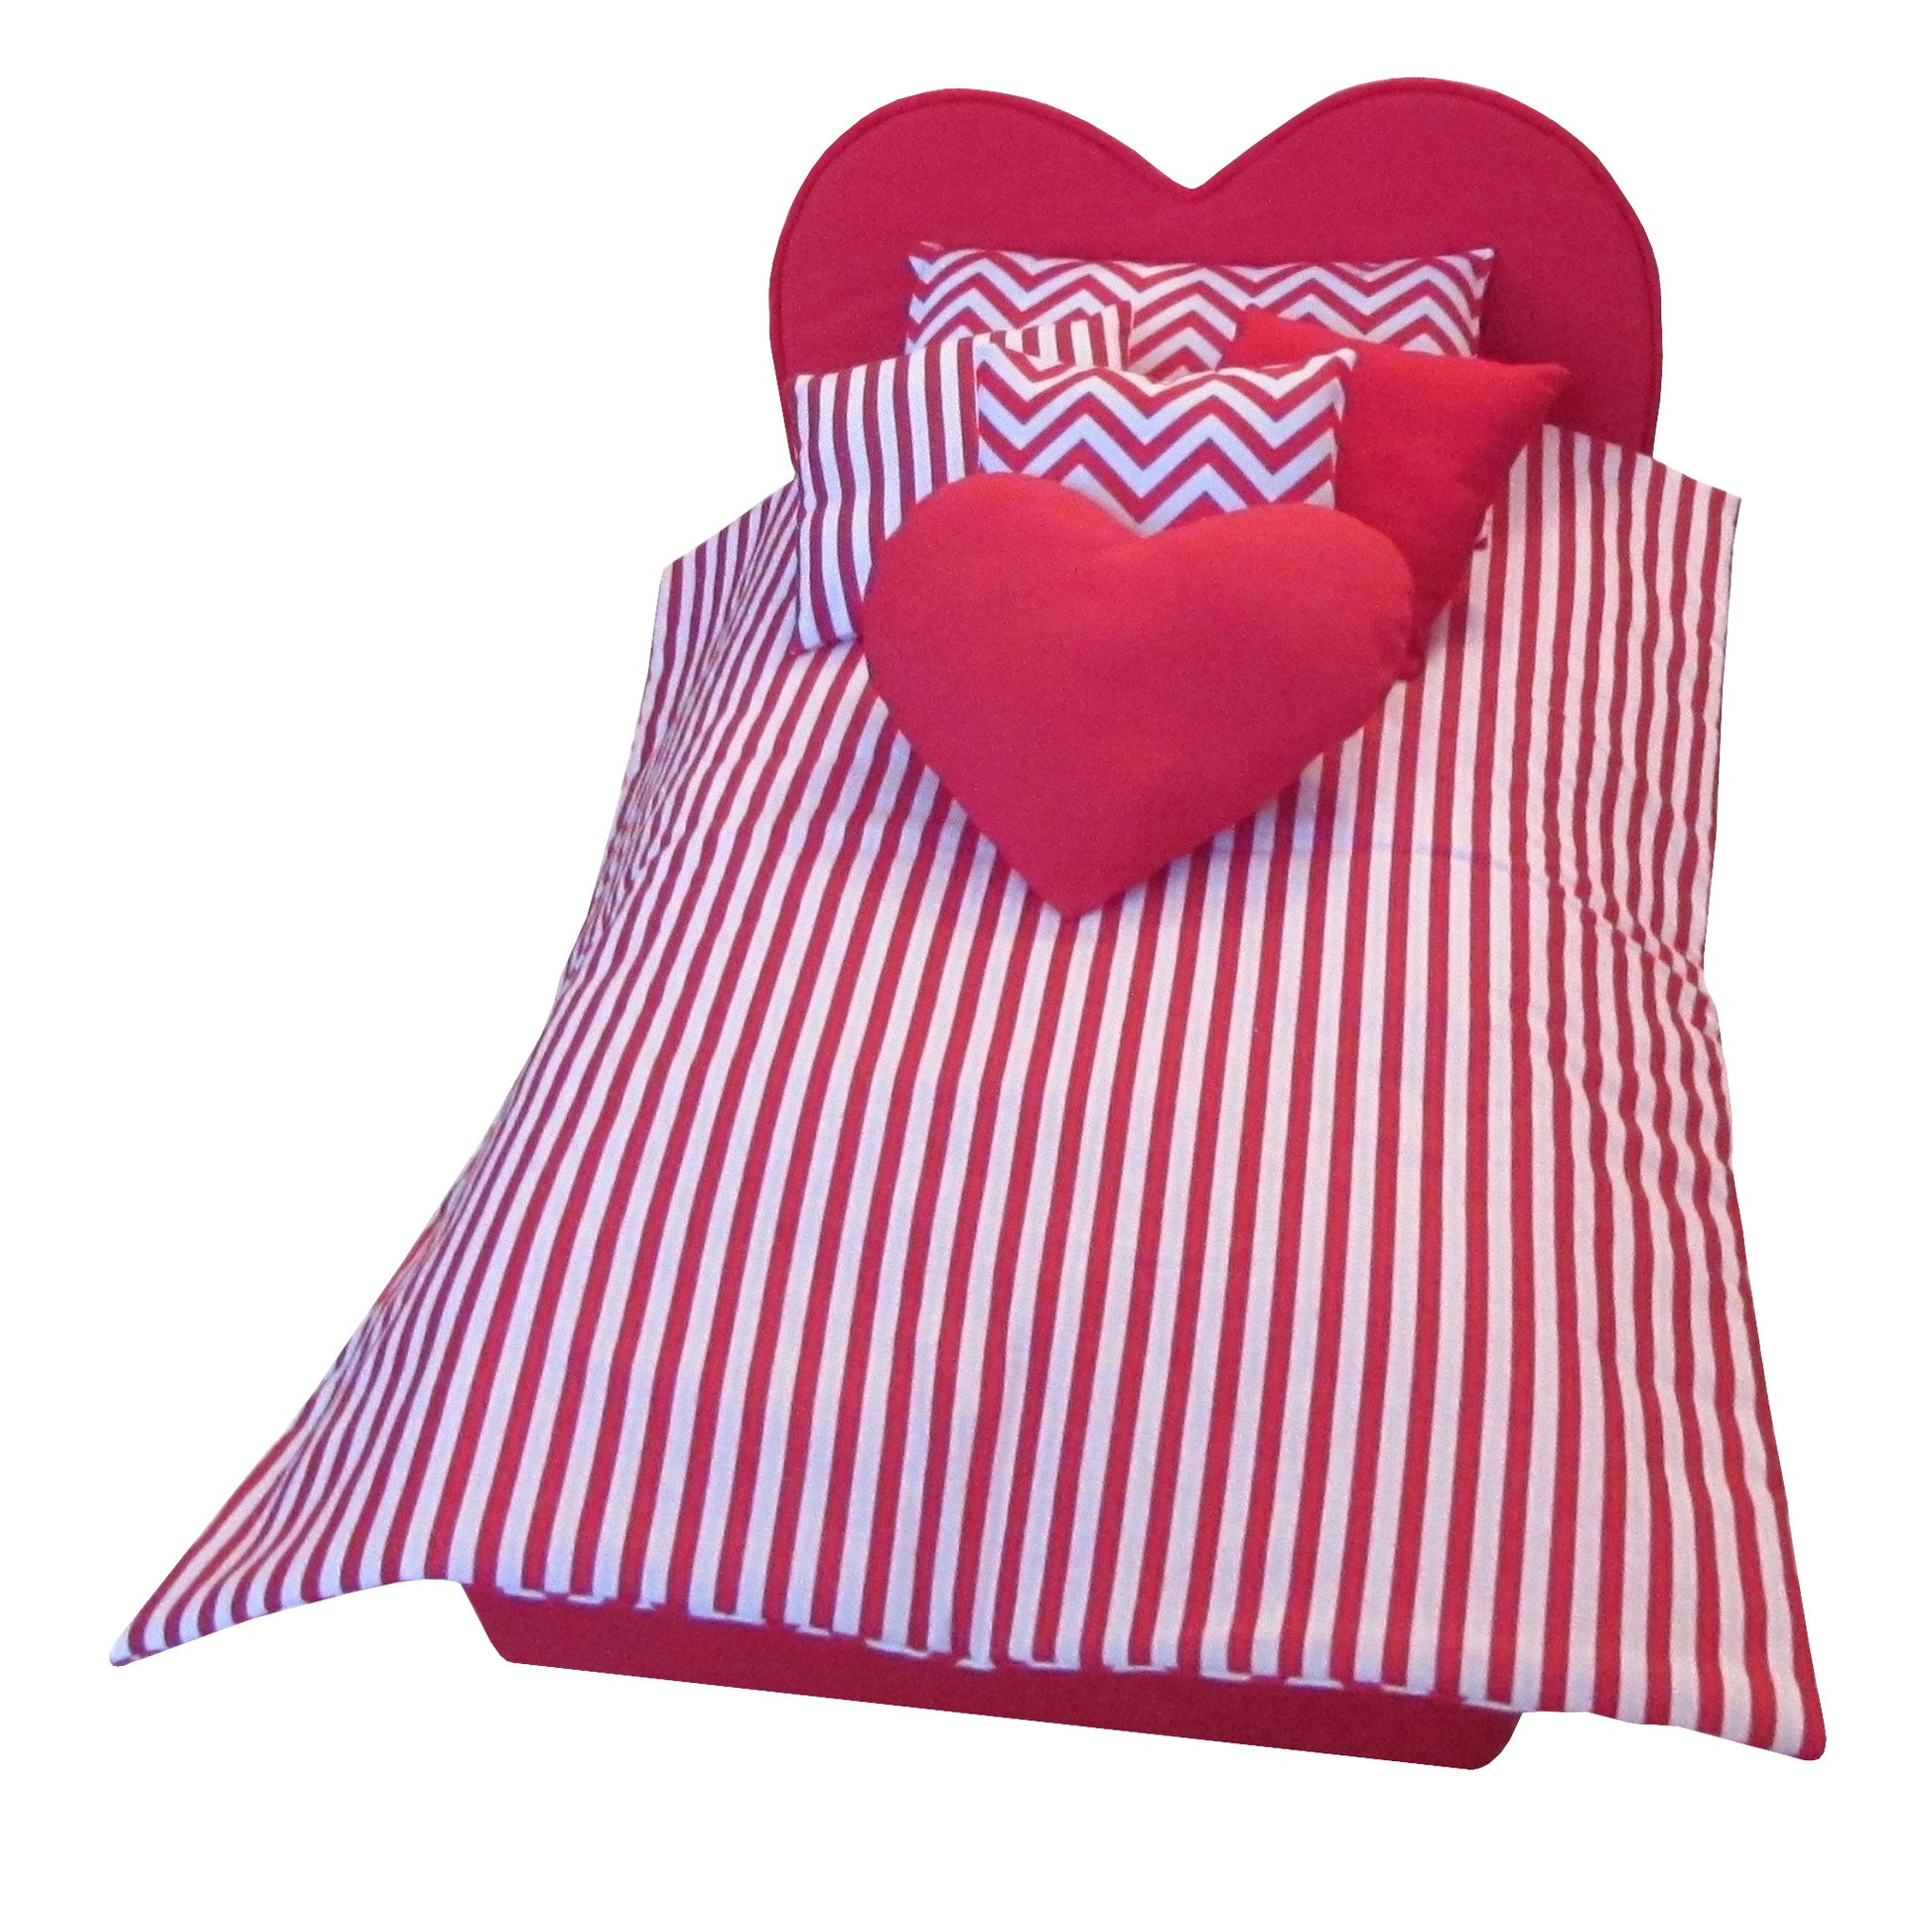 Red and White Striped Doll Comforter Set and Red Heart Upholstered Doll Bed for 18-inch dolls Second view